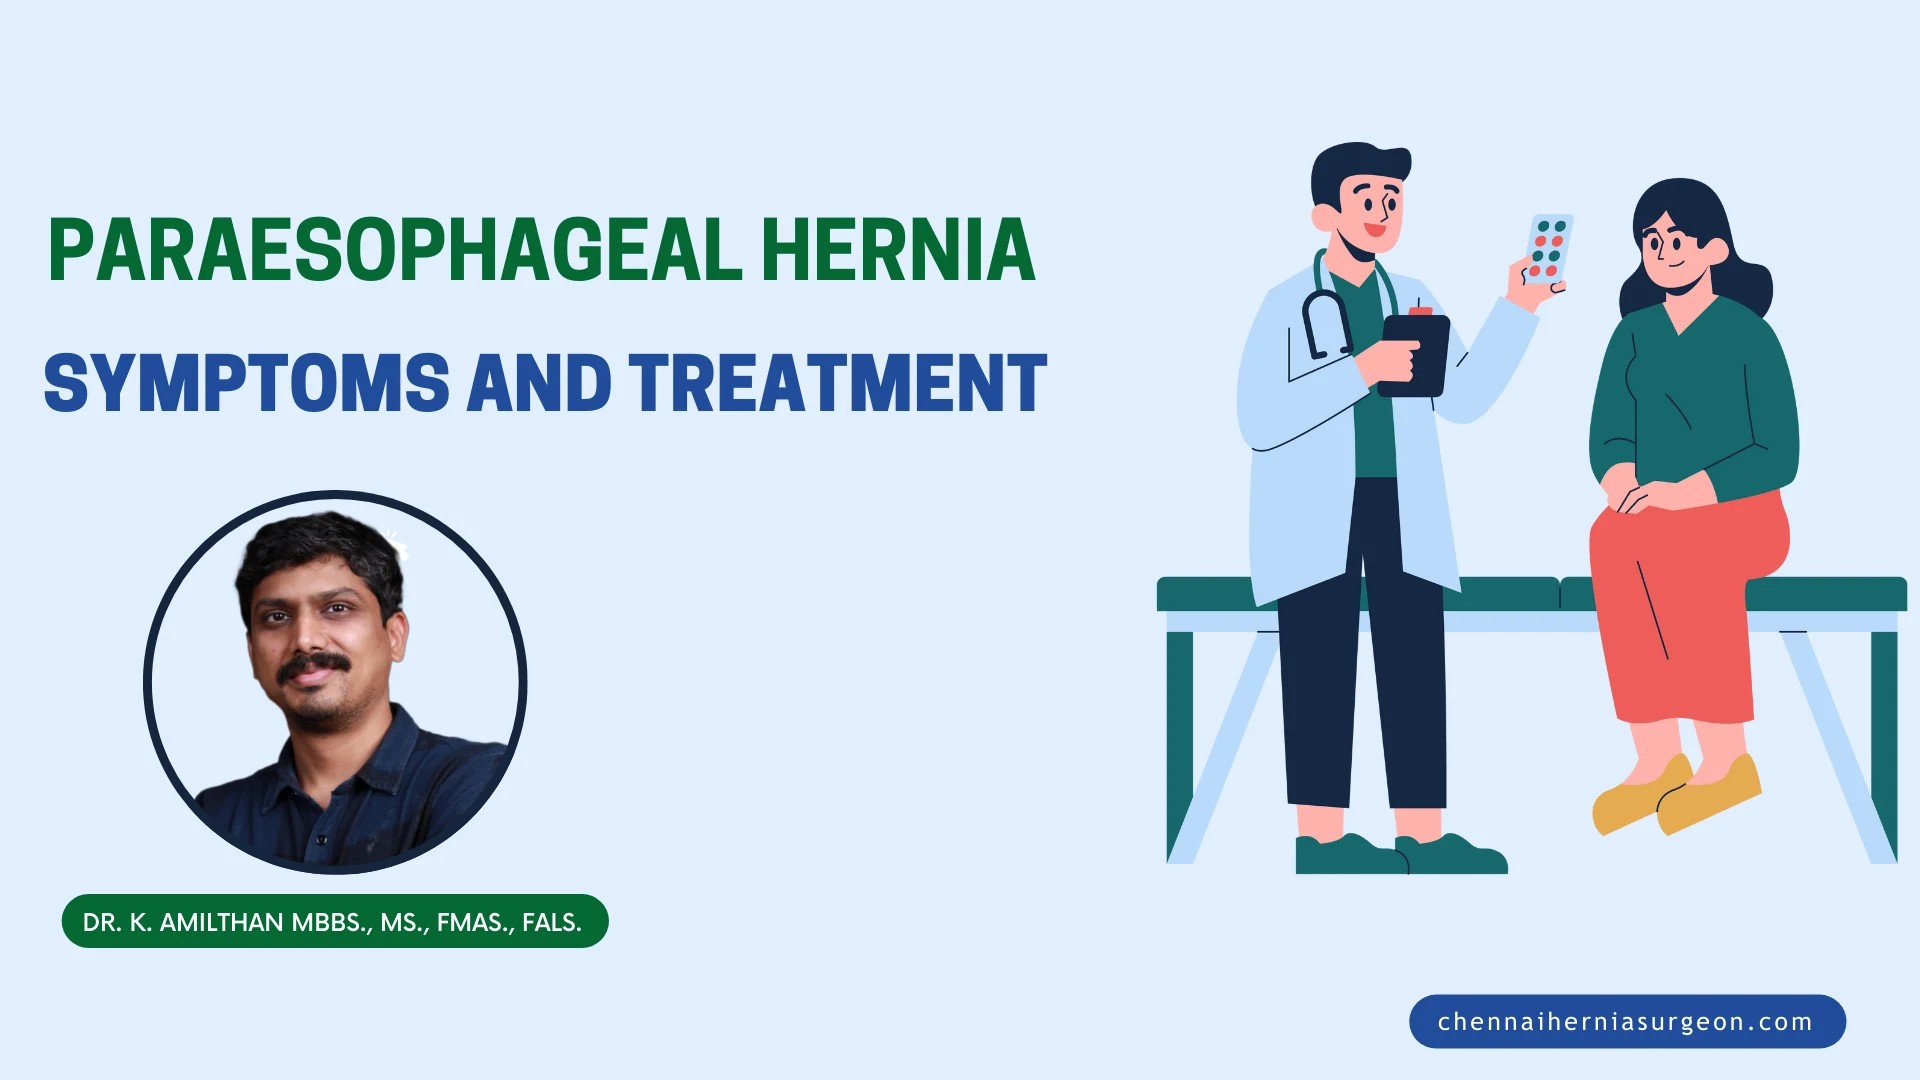 PARAESOPHAGEAL HERNIA SYMPTOMS AND TREATMENT (1)